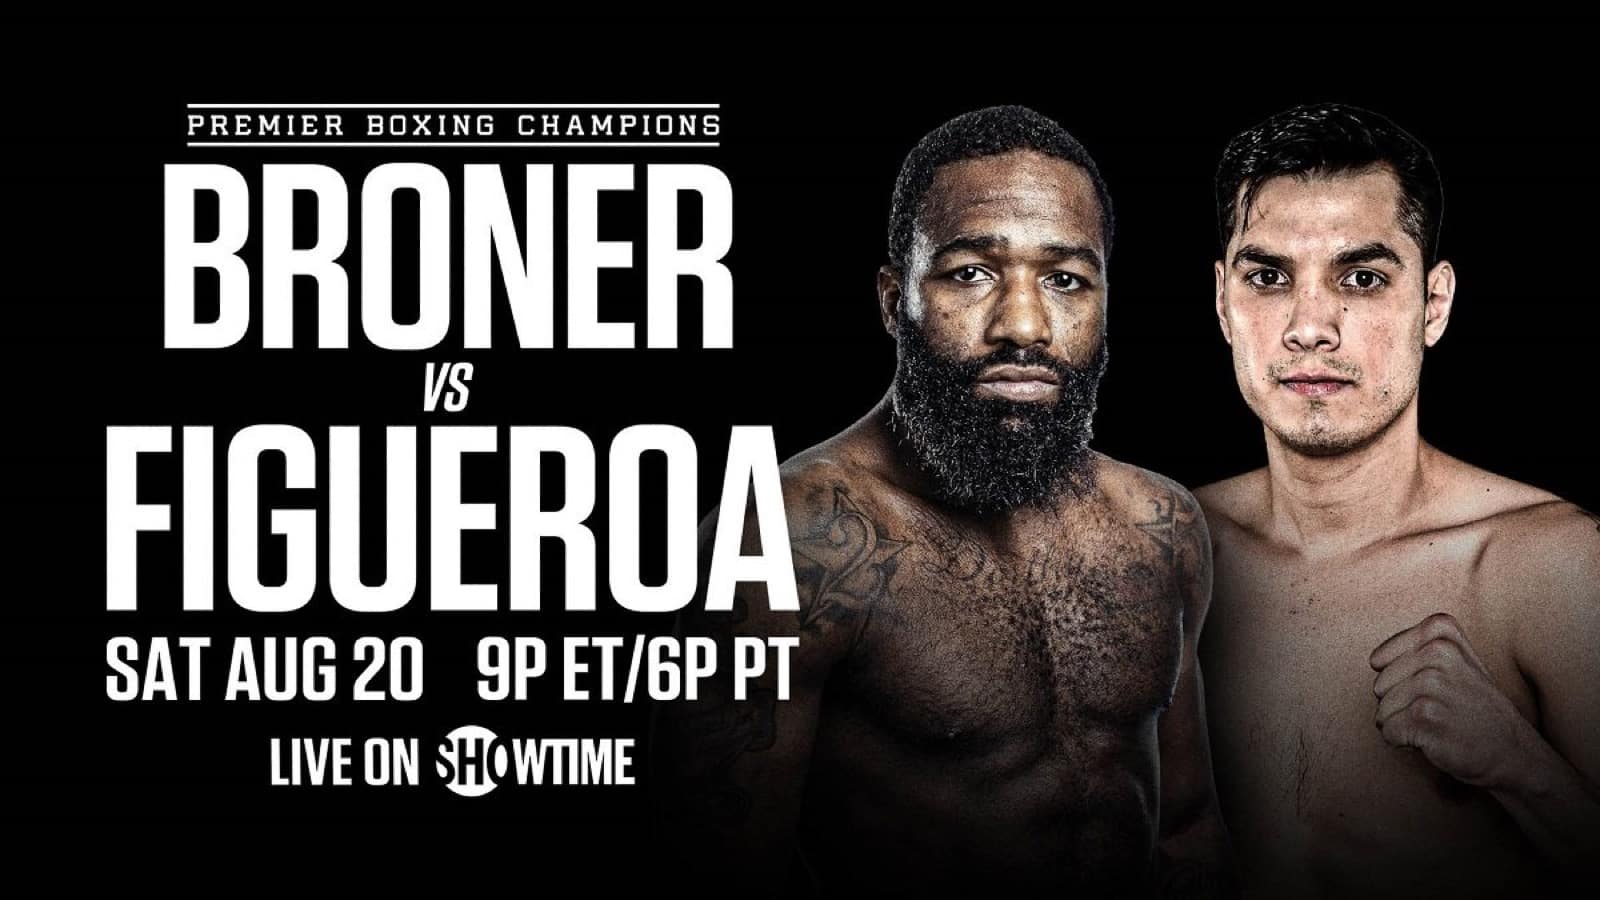 Image: Adrien Broner needs a win over Omar Figueroa on Aug.20th to revive career